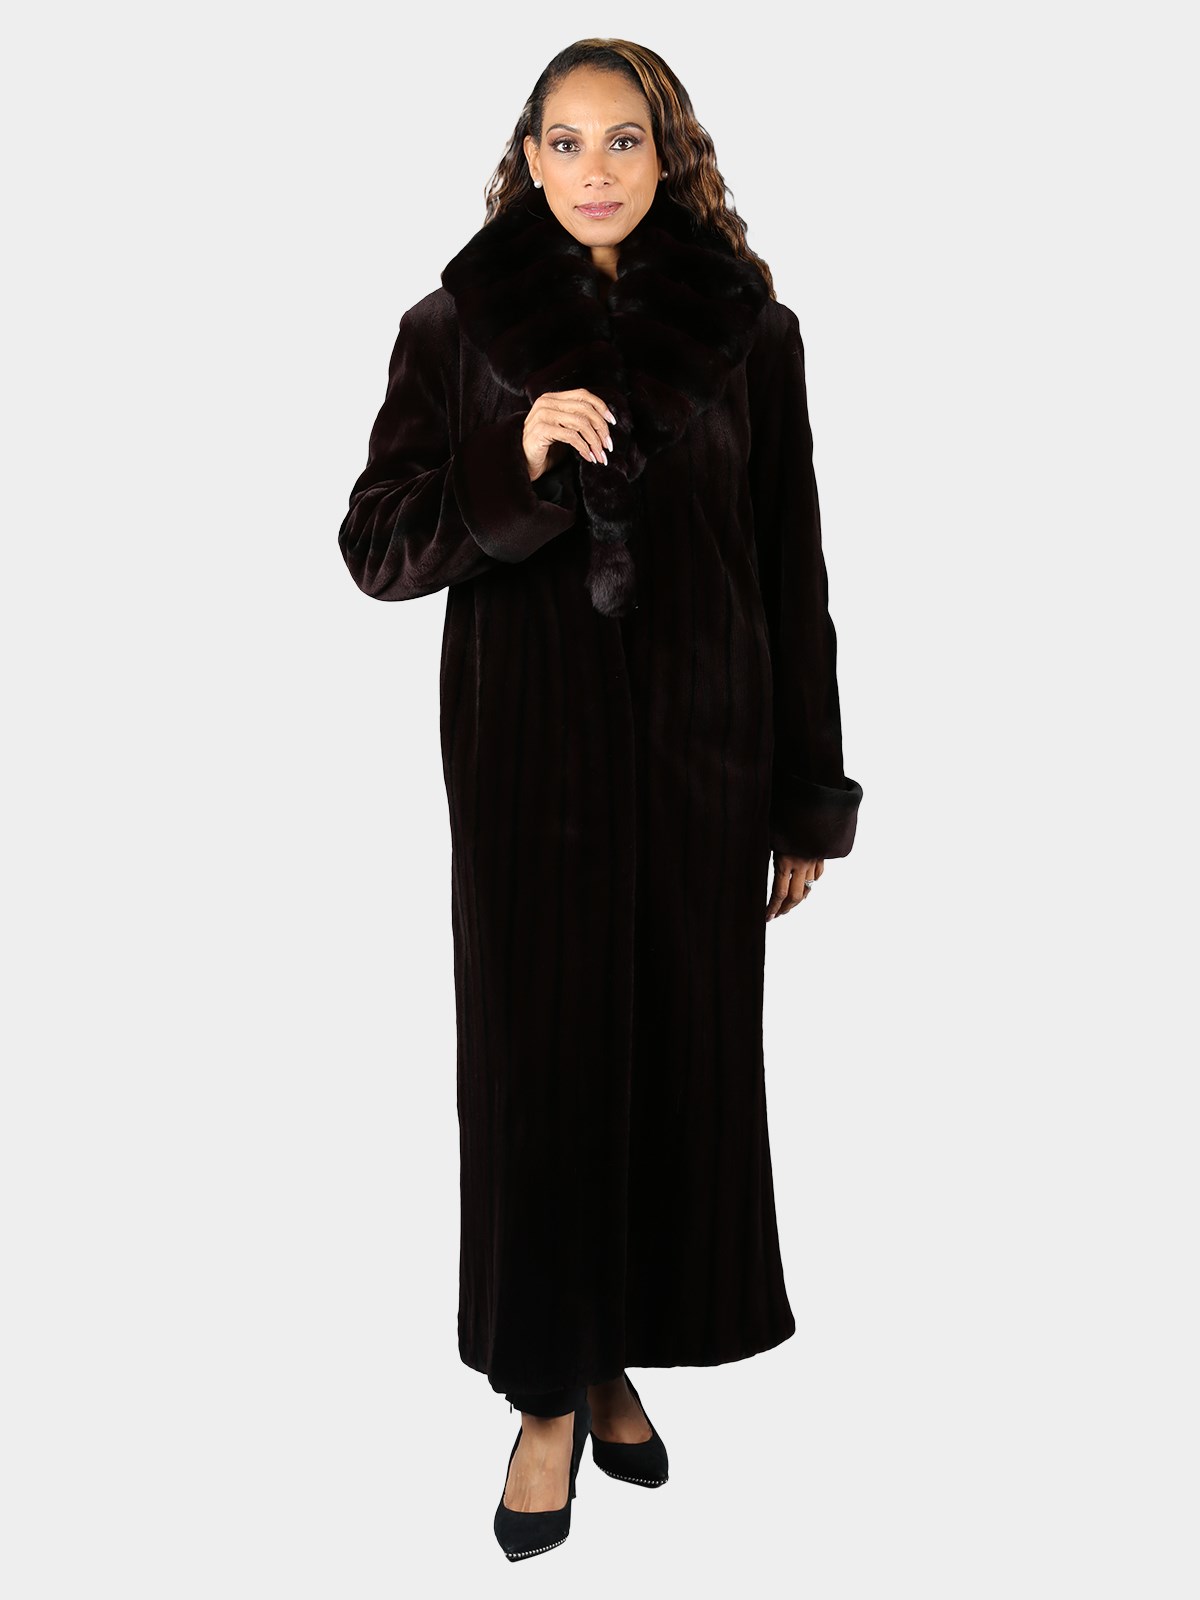 Woman's Extra Long Neiman Marcus Deep Brown Sheared Mink Fur Coat with Chinchilla Collar